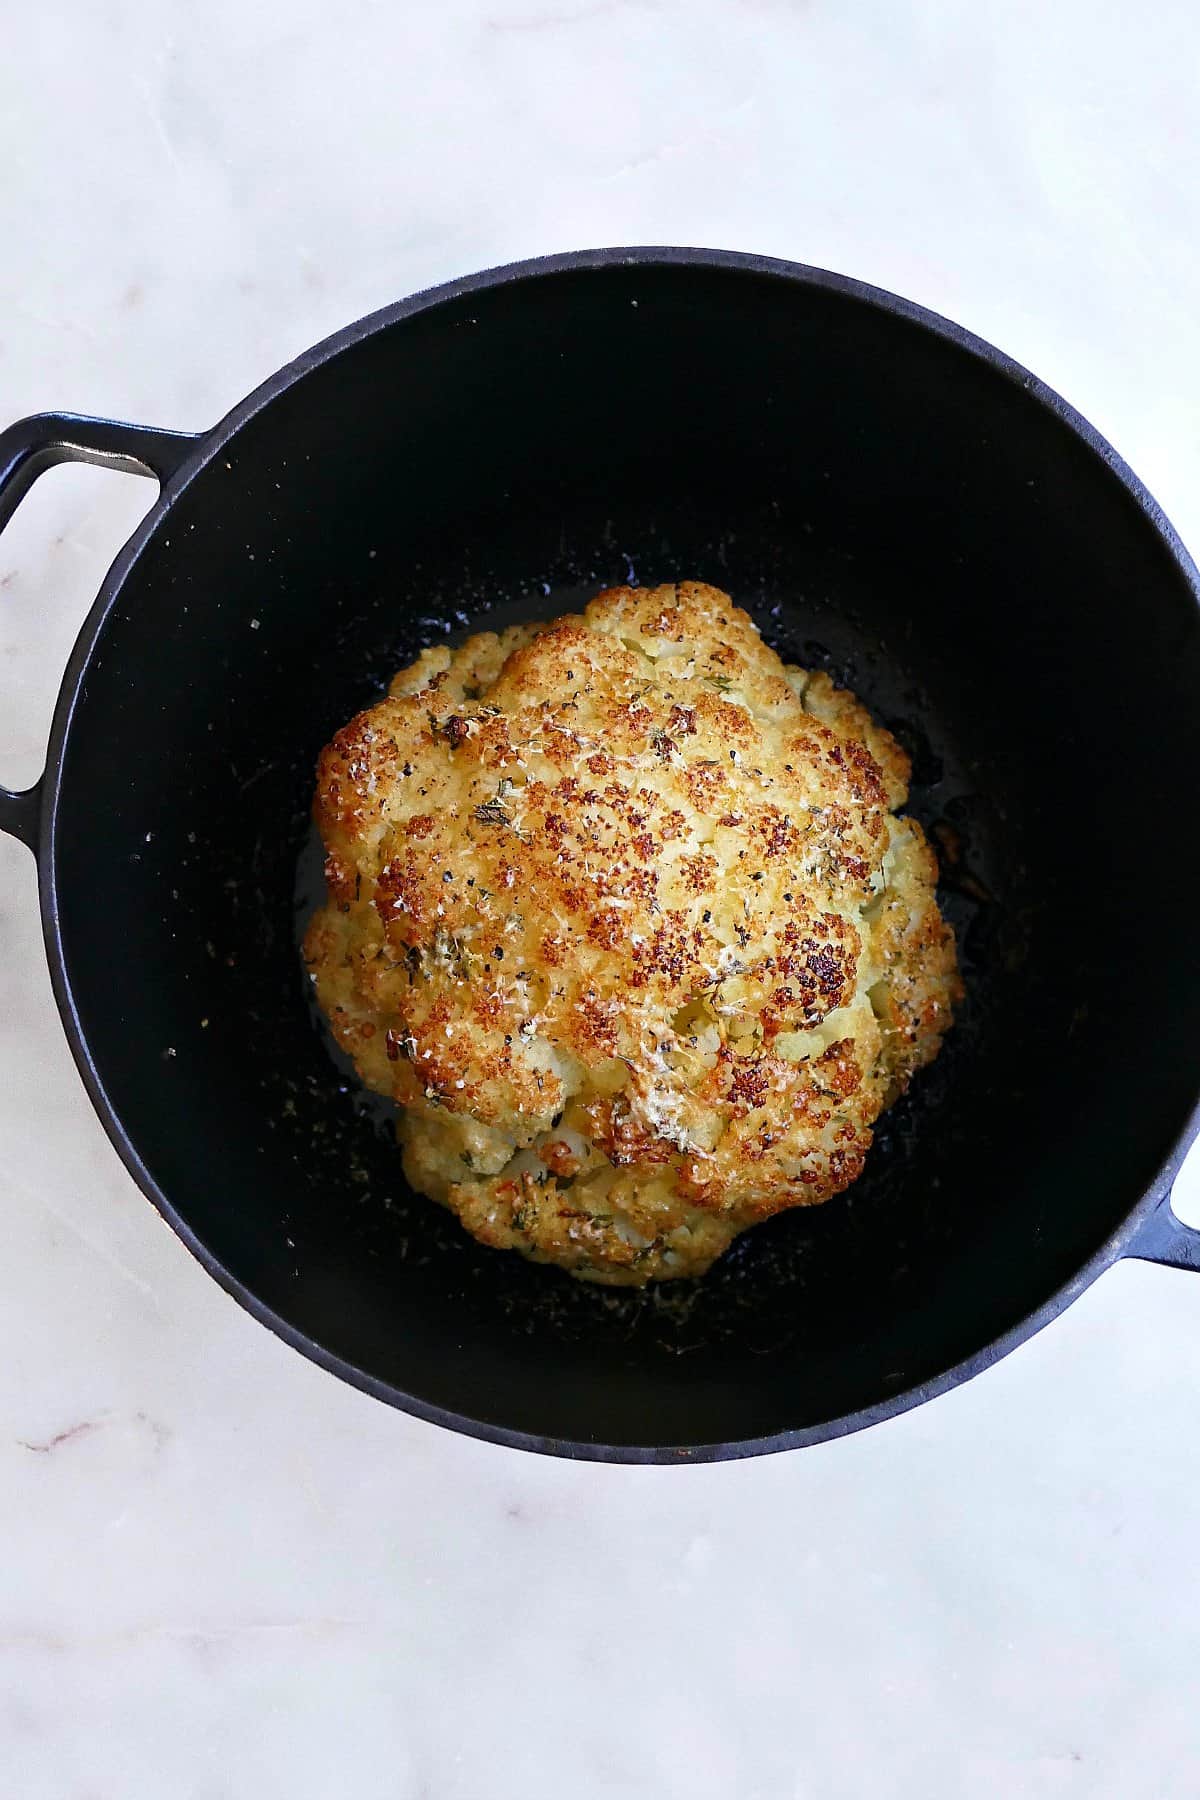 cooked cauliflower head with seasonings in a black Dutch oven on a counter